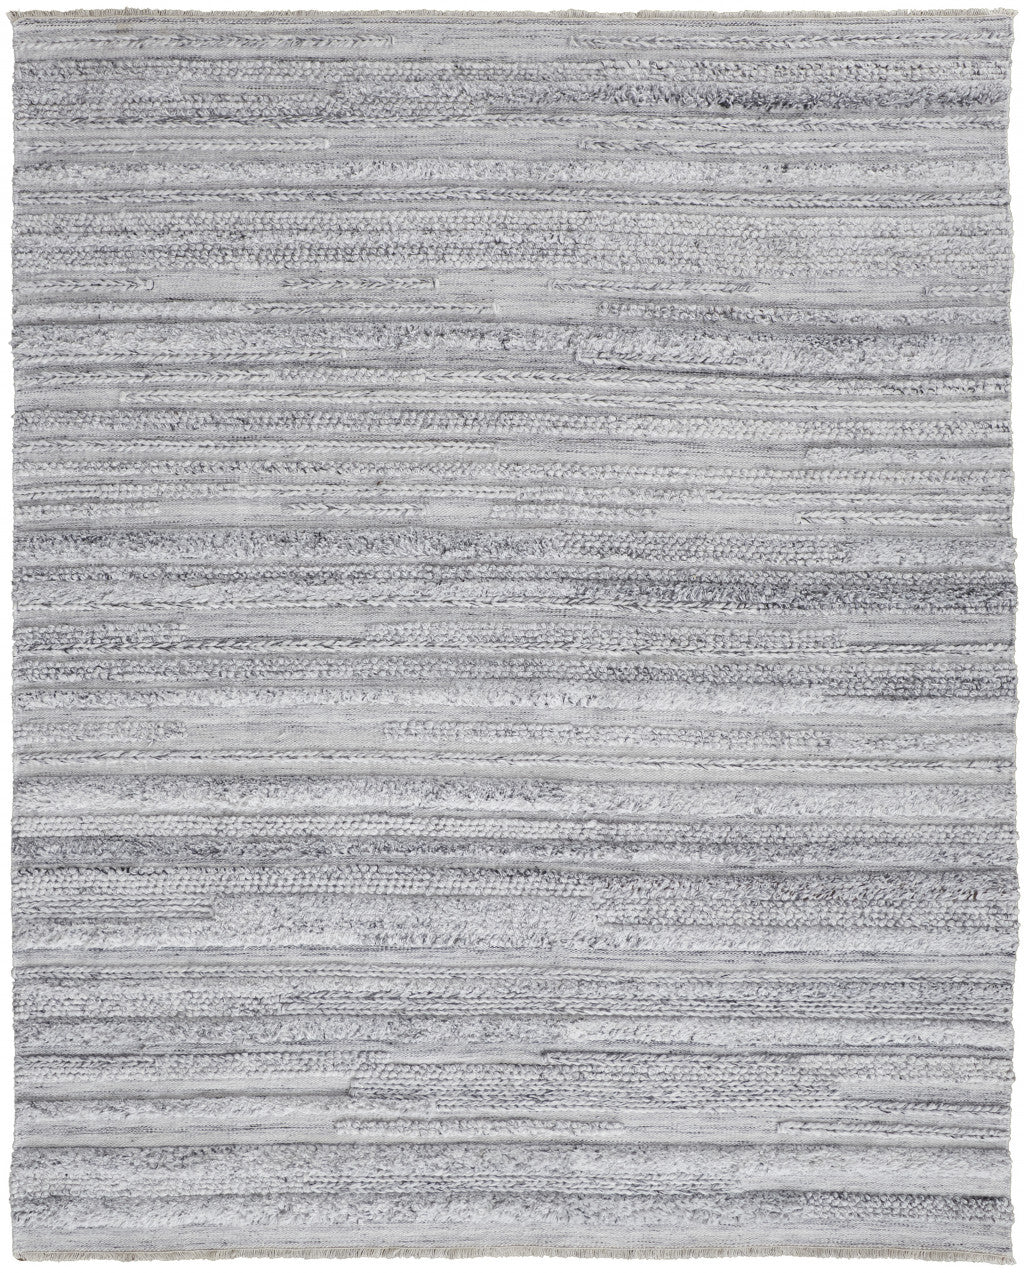 4' X 6' Ivory And Taupe Striped Hand Woven Stain Resistant Area Rug